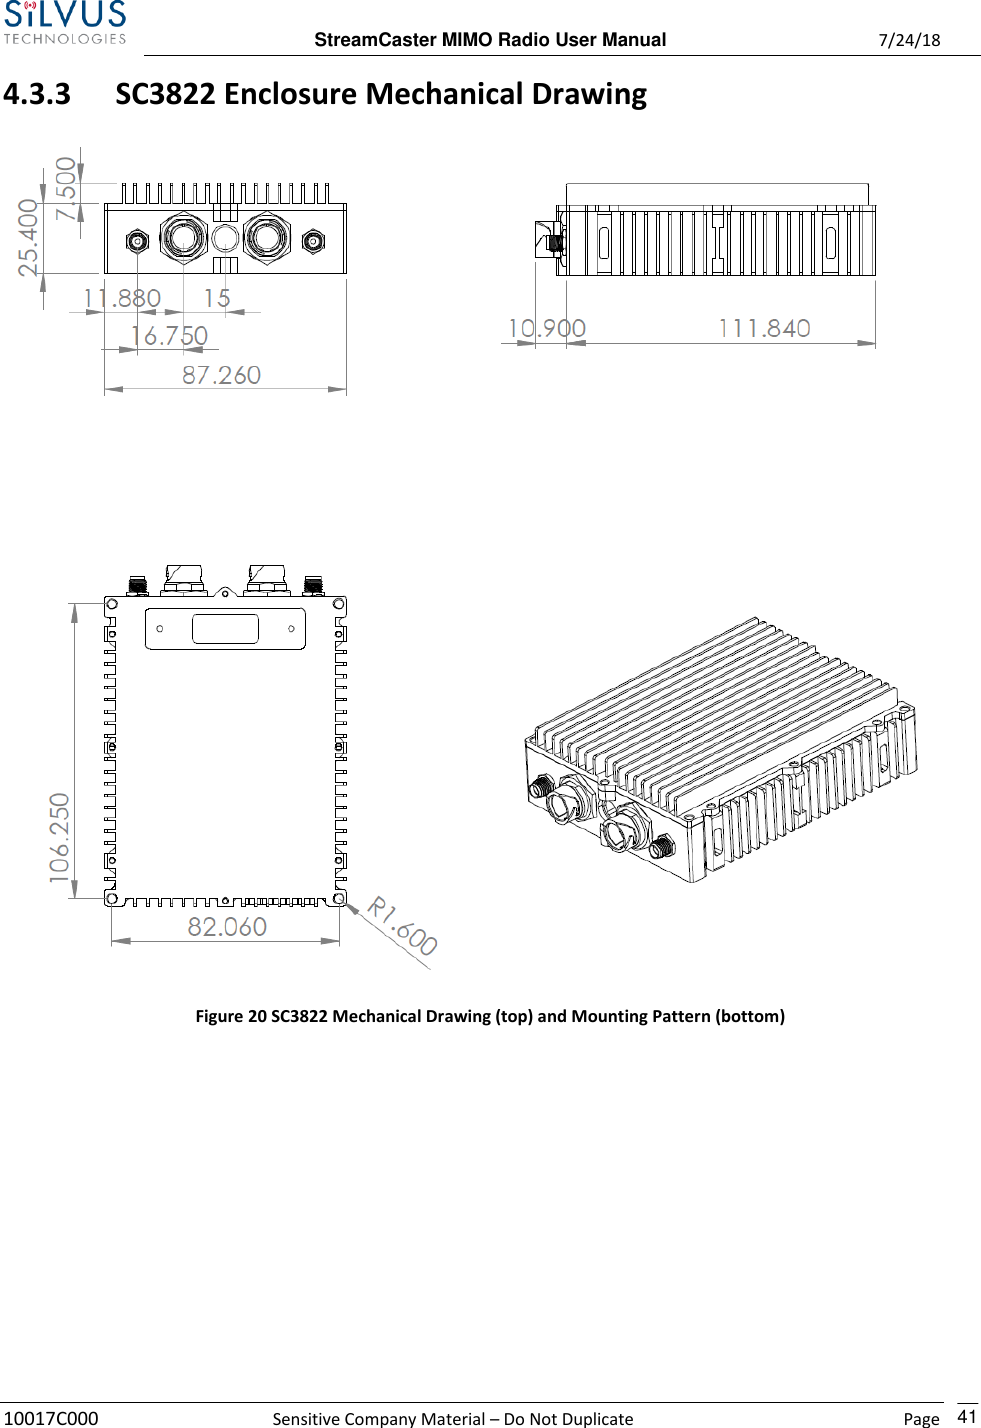  StreamCaster MIMO Radio User Manual  7/24/18 10017C000  Sensitive Company Material – Do Not Duplicate    Page    41 4.3.3 SC3822 Enclosure Mechanical Drawing   Figure 20 SC3822 Mechanical Drawing (top) and Mounting Pattern (bottom)  